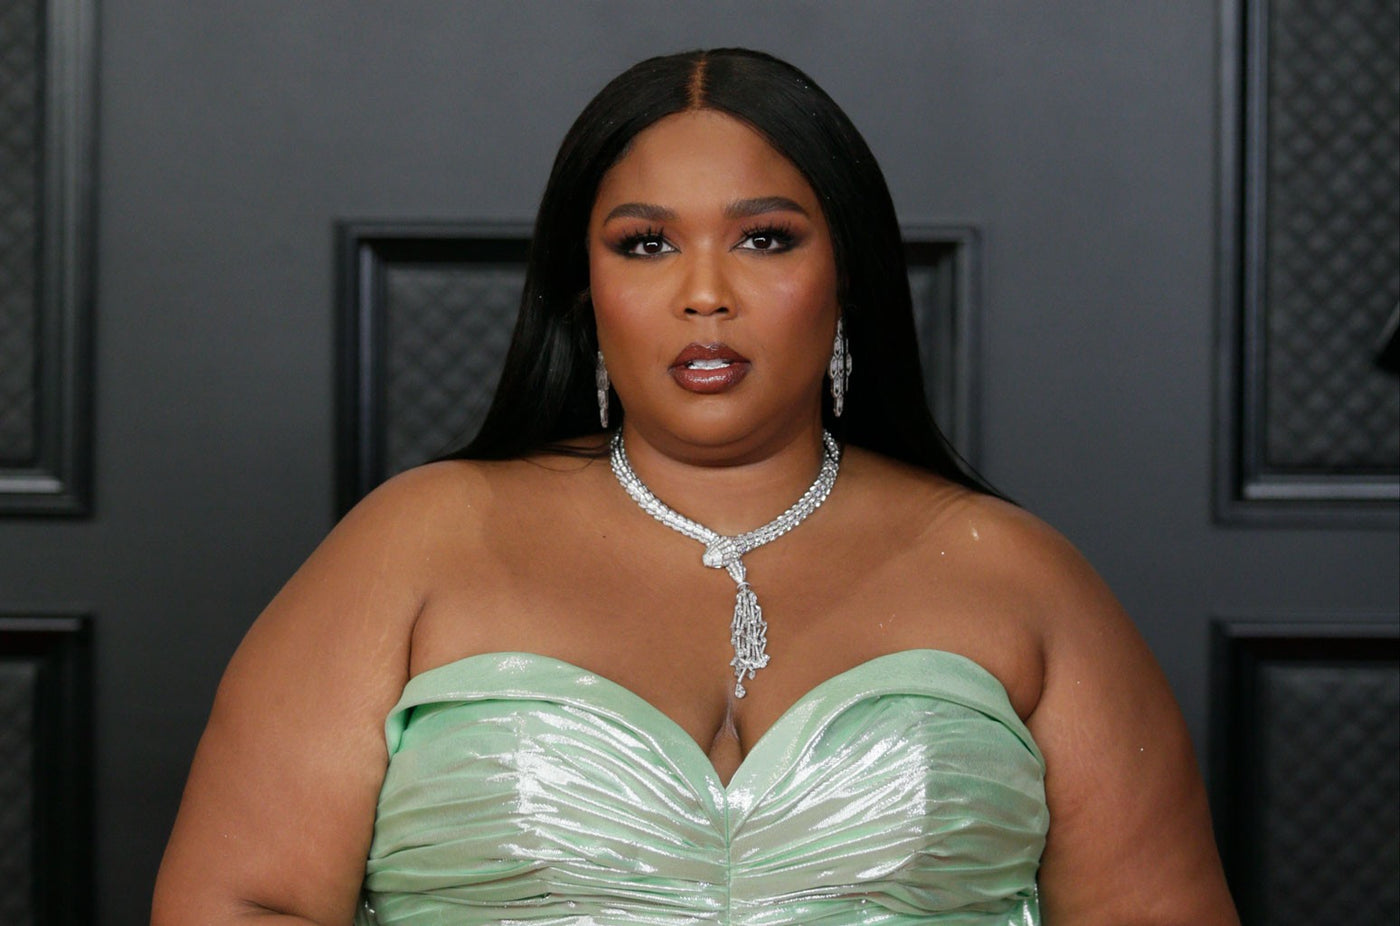 Lizzo tearfully slams 'fatphobic,' 'racist' haters as Cardi B and more celebs offer support